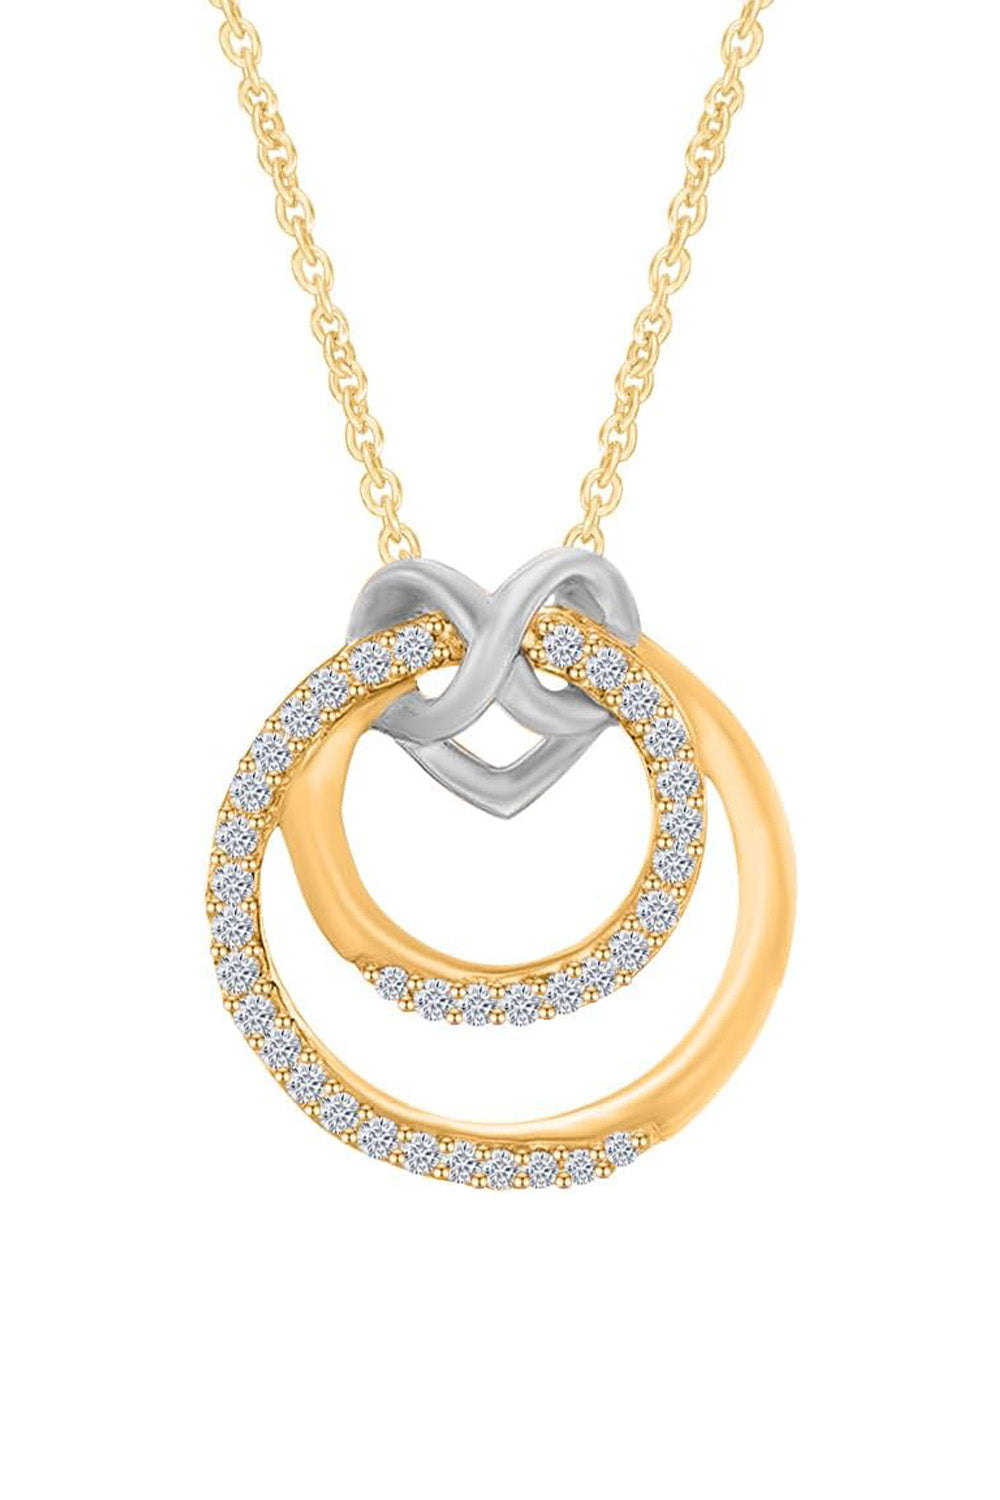 Yaathi 1/5Cttw Moissanite Infinity Heart and Double Circle Pendant Necklace in 18k Gold over Sterling Silver.